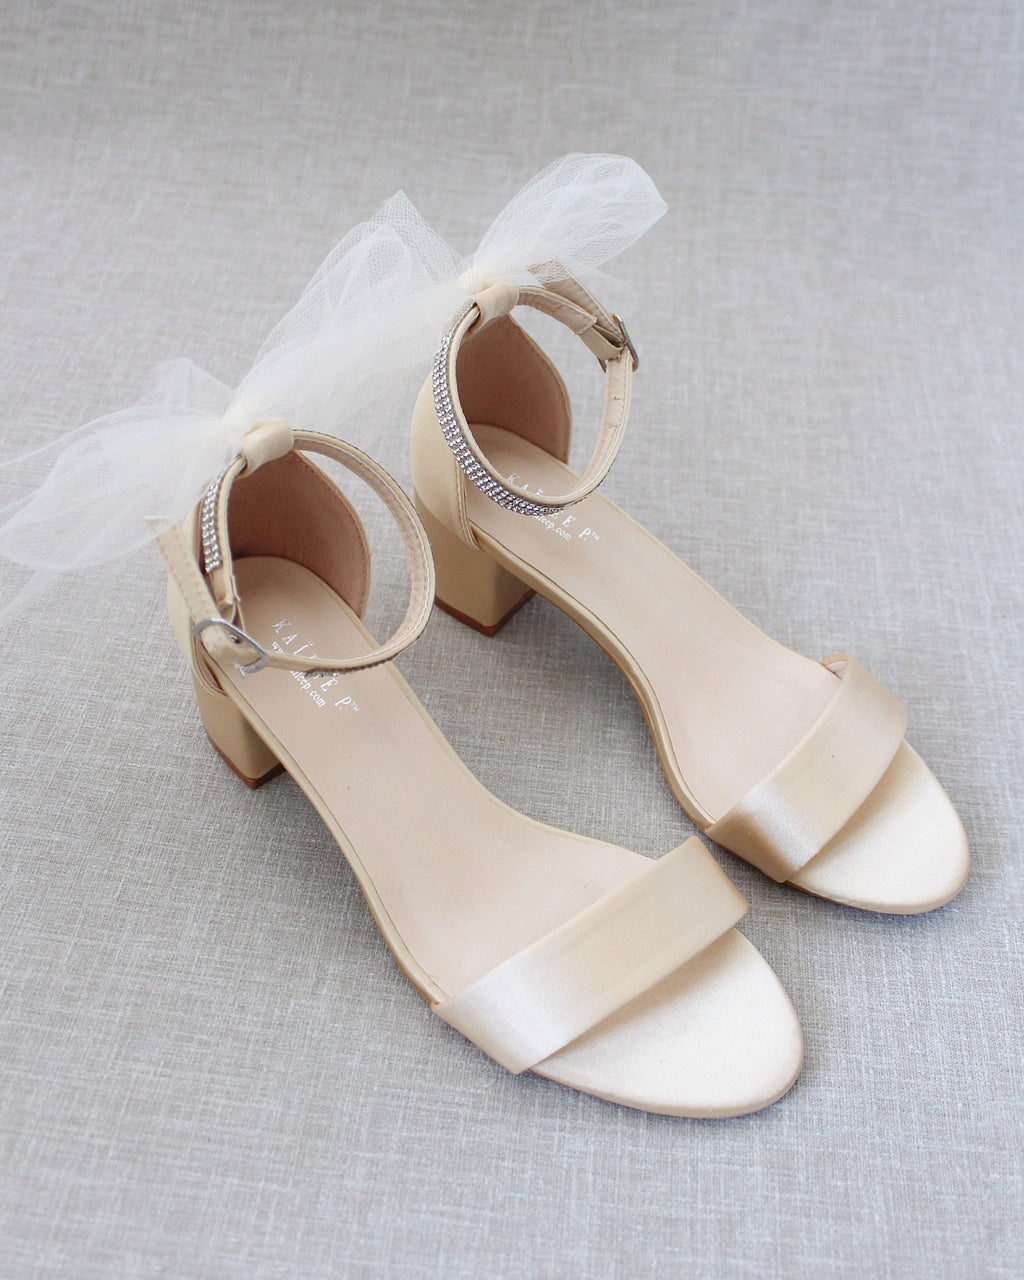 Champagne Satin Block Heel Sandals with Tulle Back Bow, Wedding Sandals ...